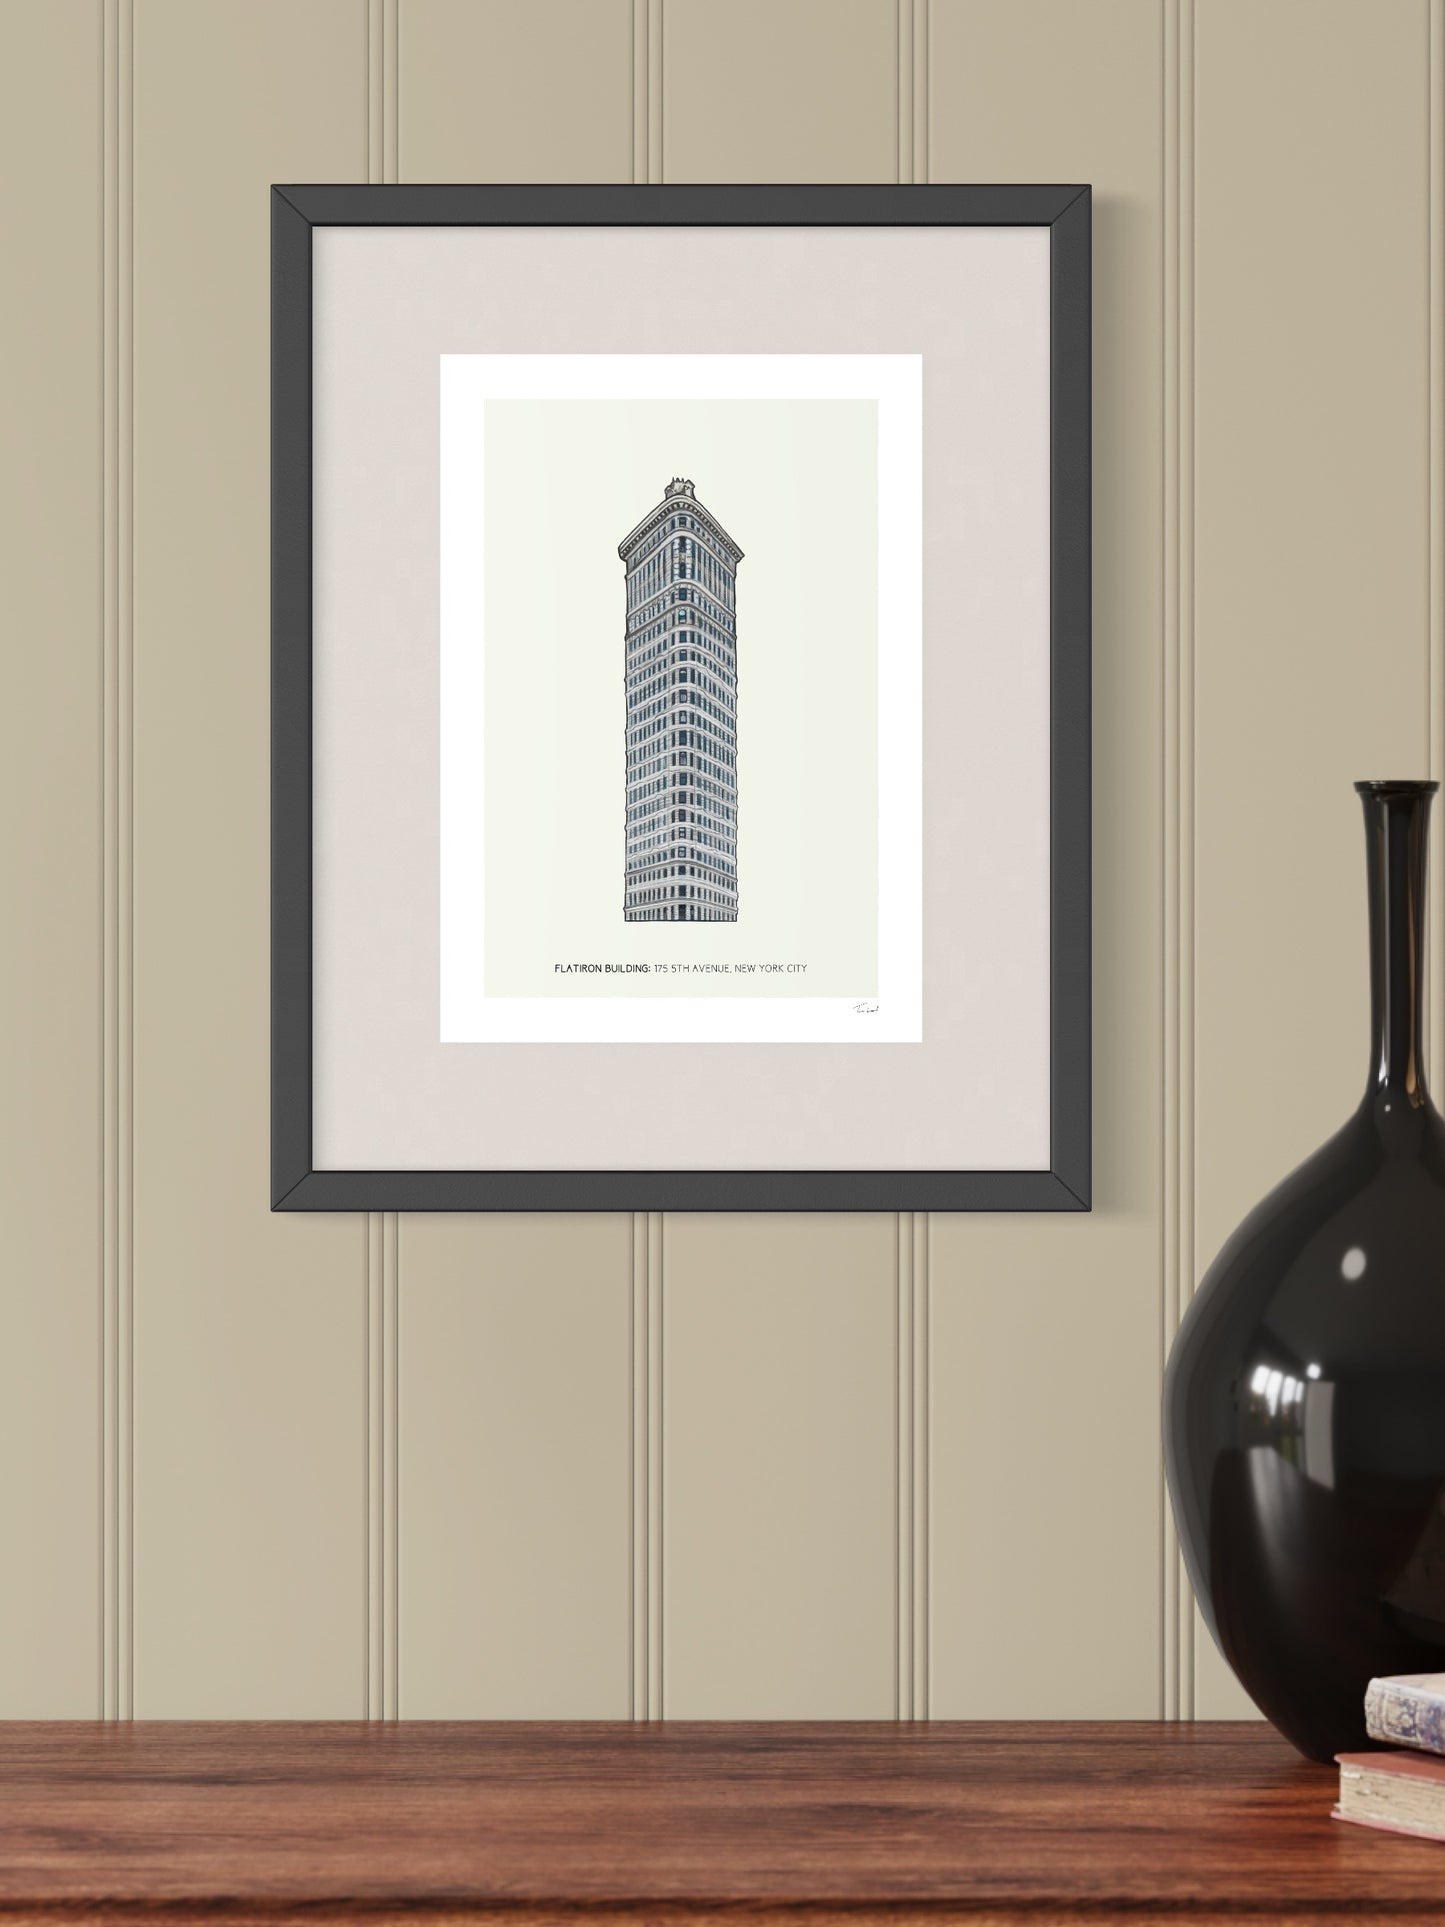 This image shows a giclee wall art print by Tom Laird Illustration of the world-famous New York City landmark the Flatiron Building, framed in a beautiful living room with tasteful modern home decor. This art print is available from Tom Laird Illustration in A4 size.